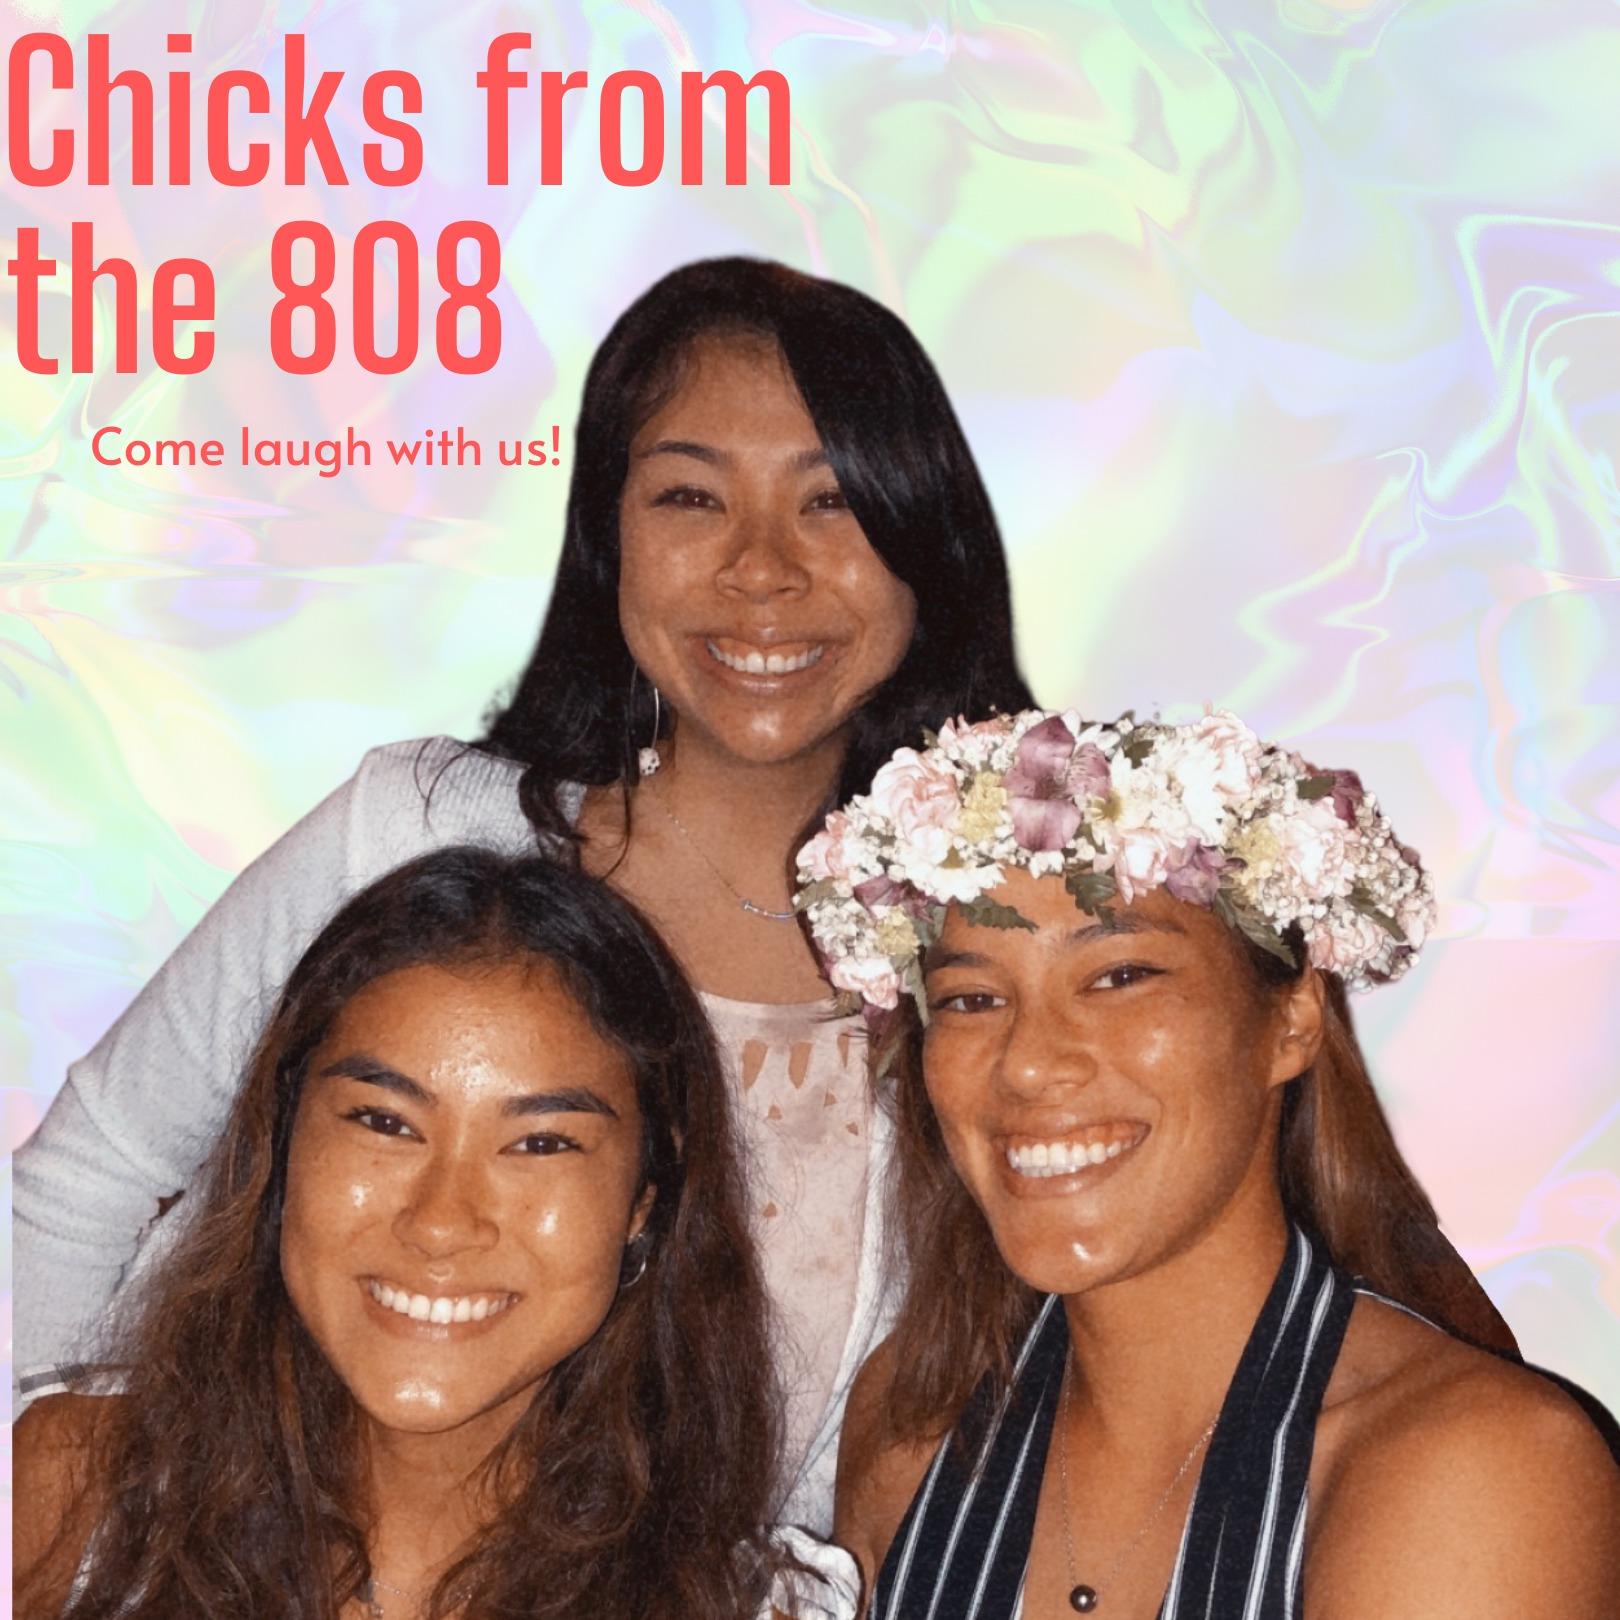 Chicks from the 808